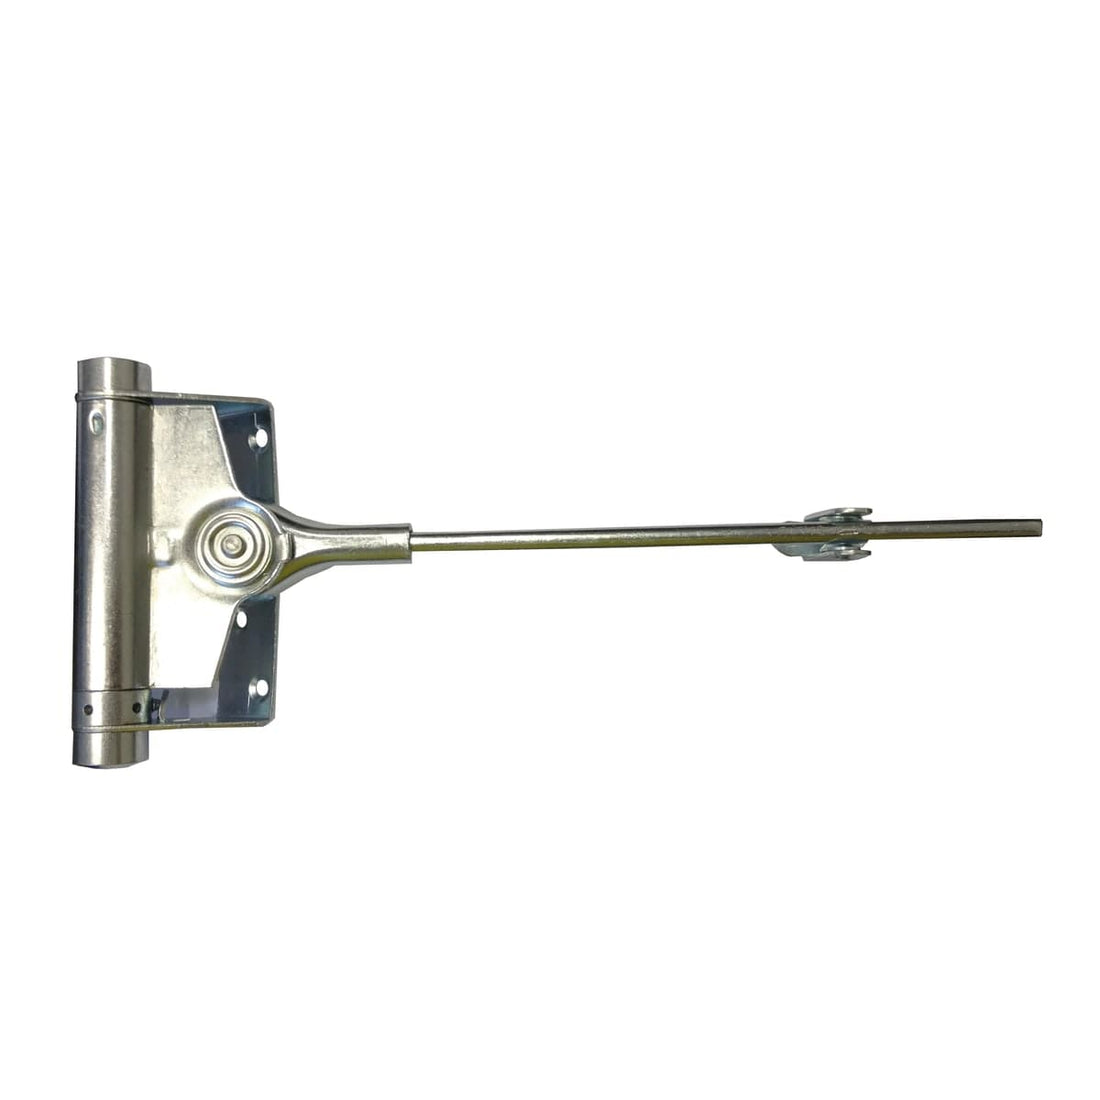 GALVANISED SPRING-LOADED DOOR PUSHER 25 KG WITHOUT STOP